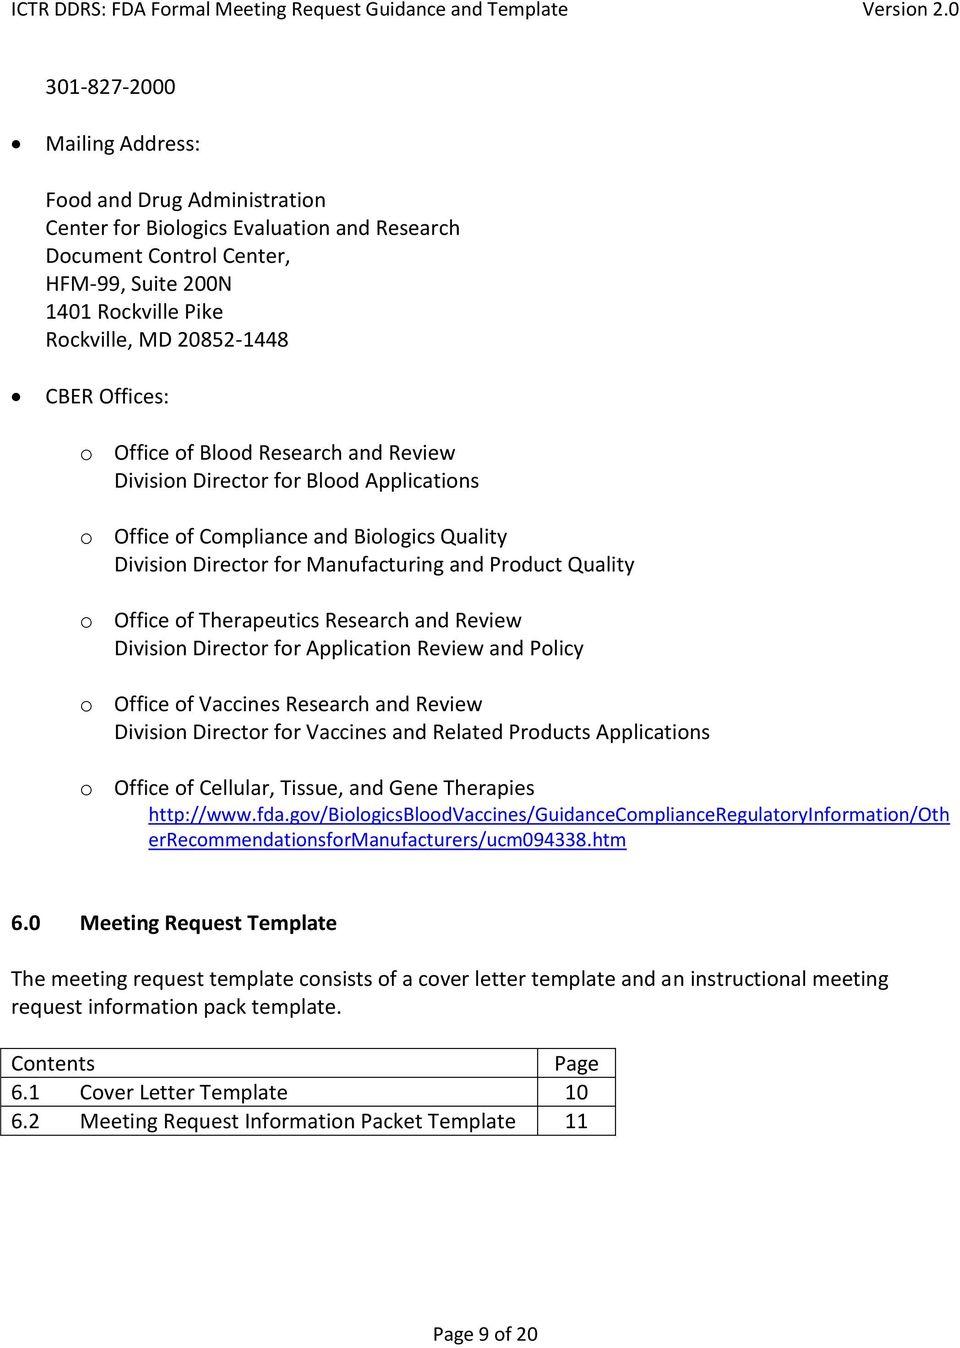 Formal FDA Meeting Request: Guidance and Template - PDF Free Download Inside Meeting Request Template